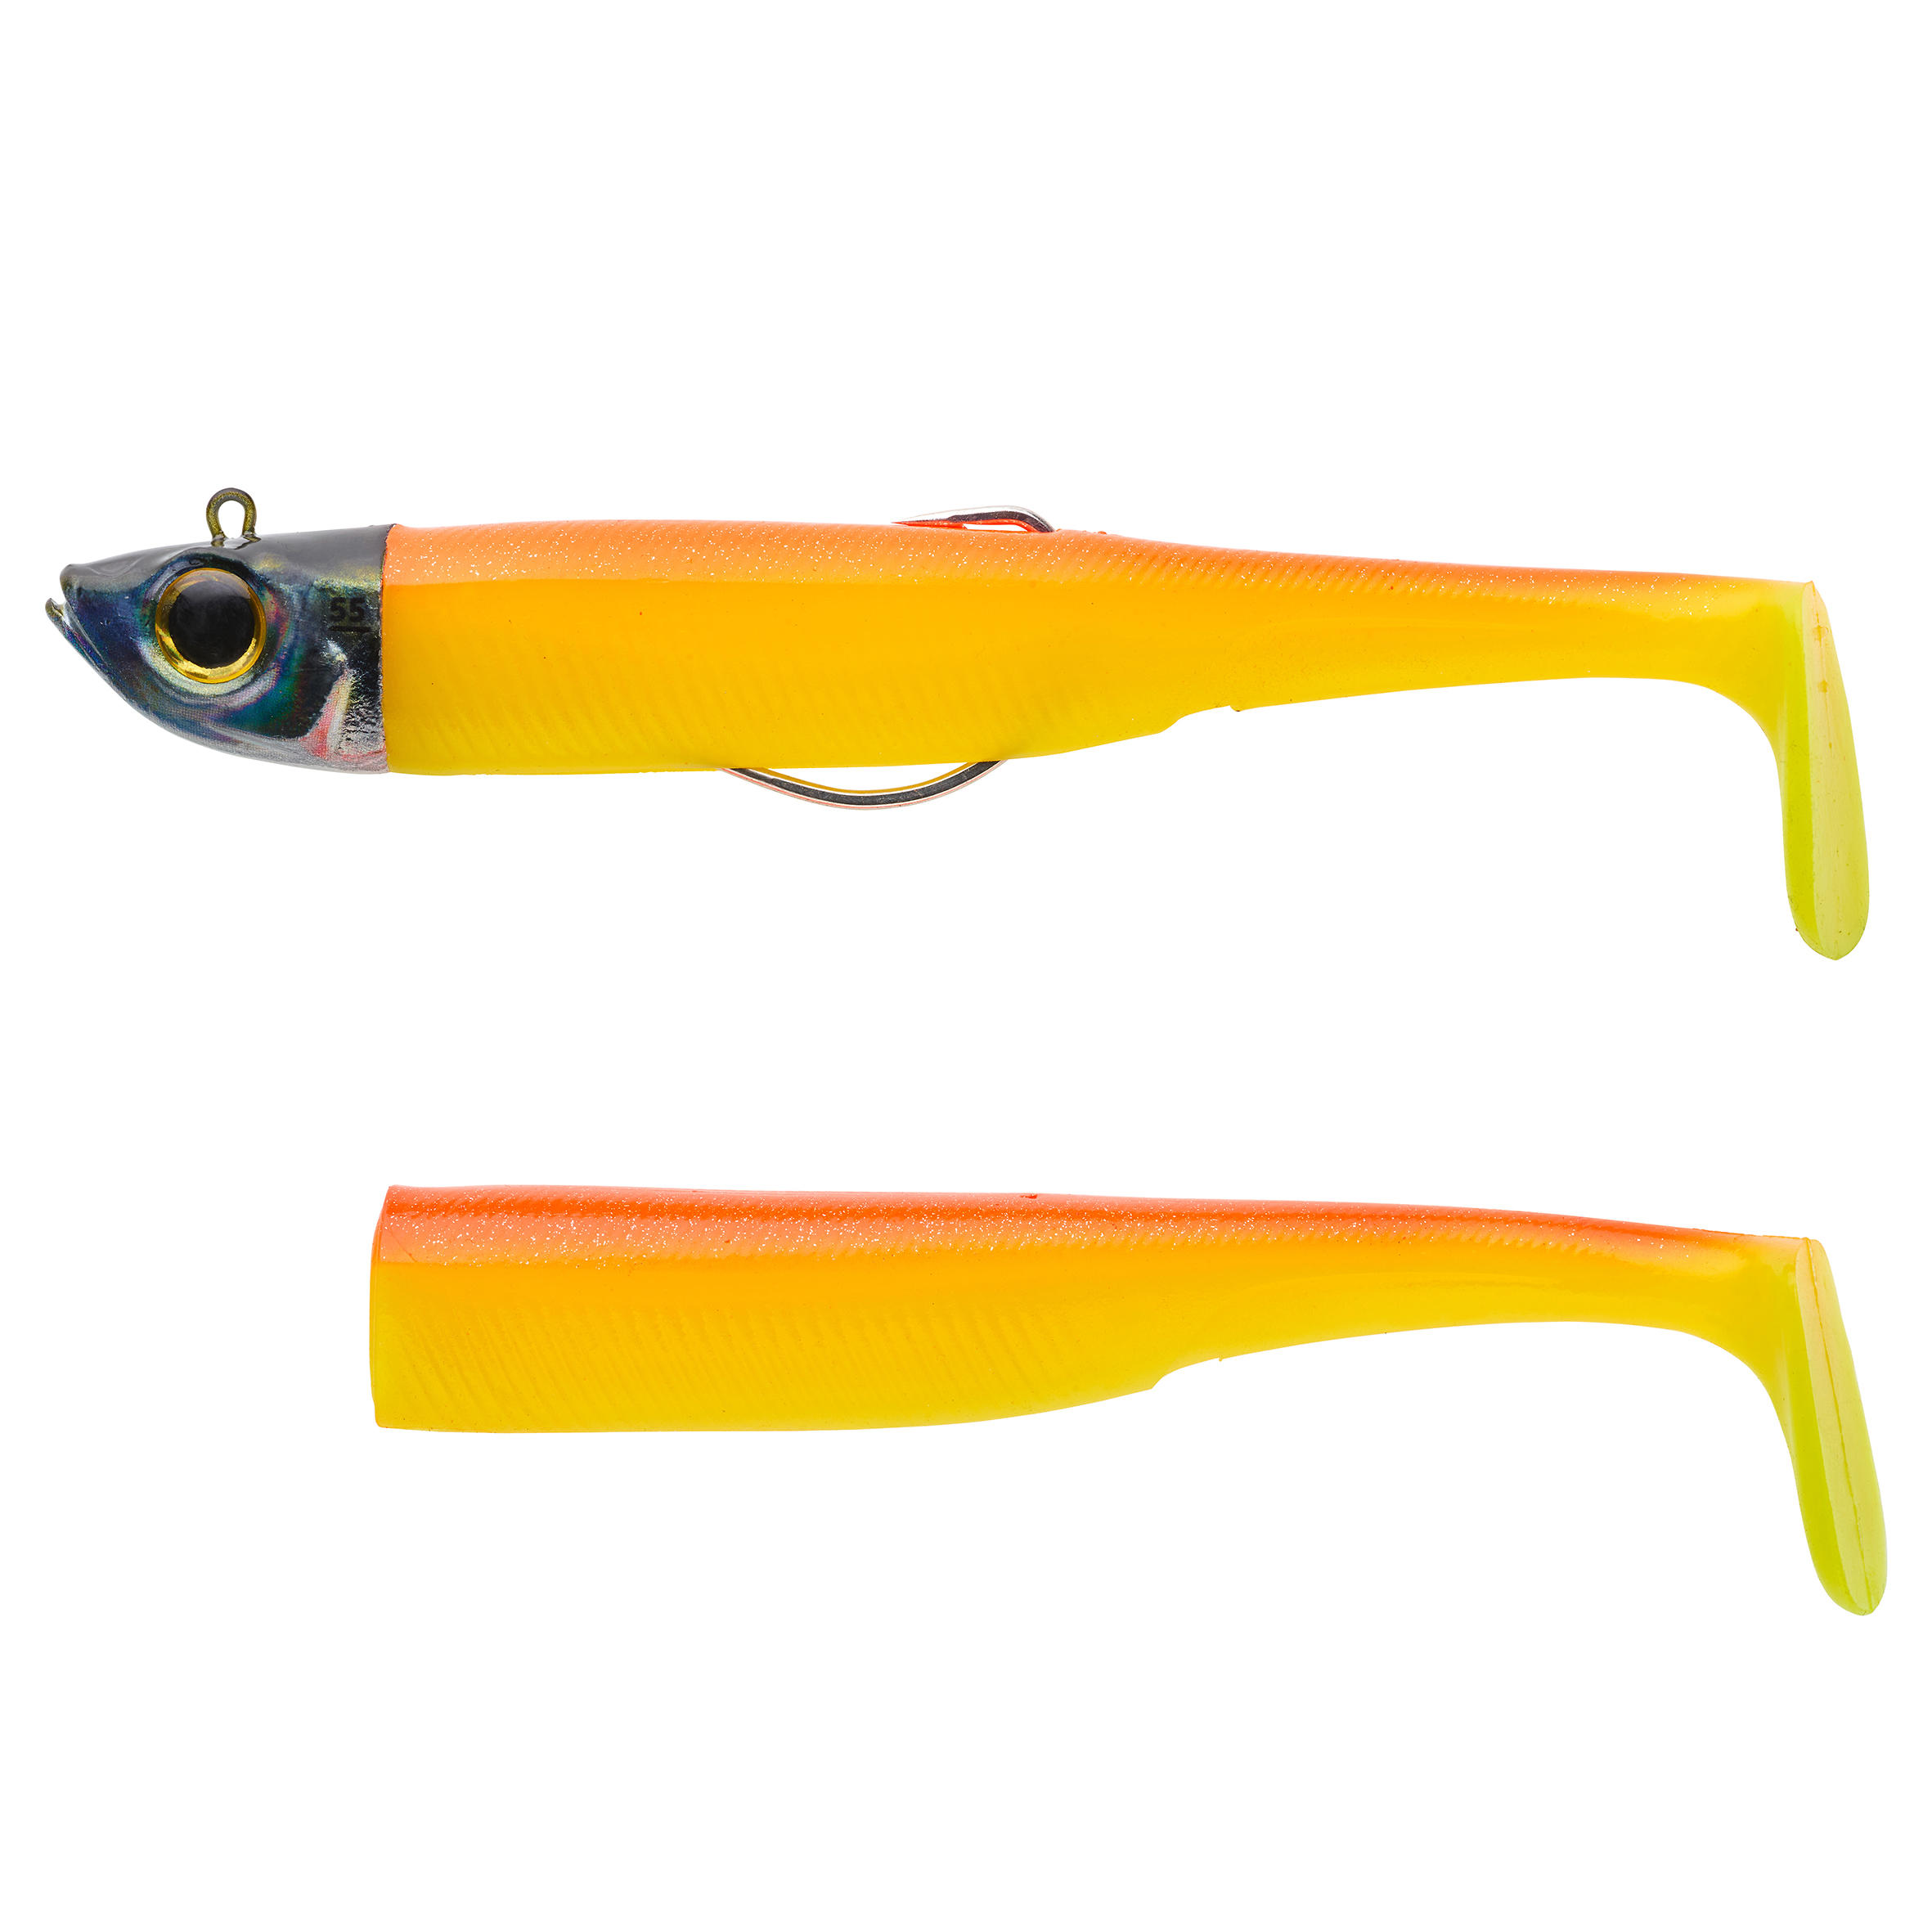 CAPERLAN Sea fishing Texas anchovy shad supple lures KIT ANCHO 150 55 g - orange